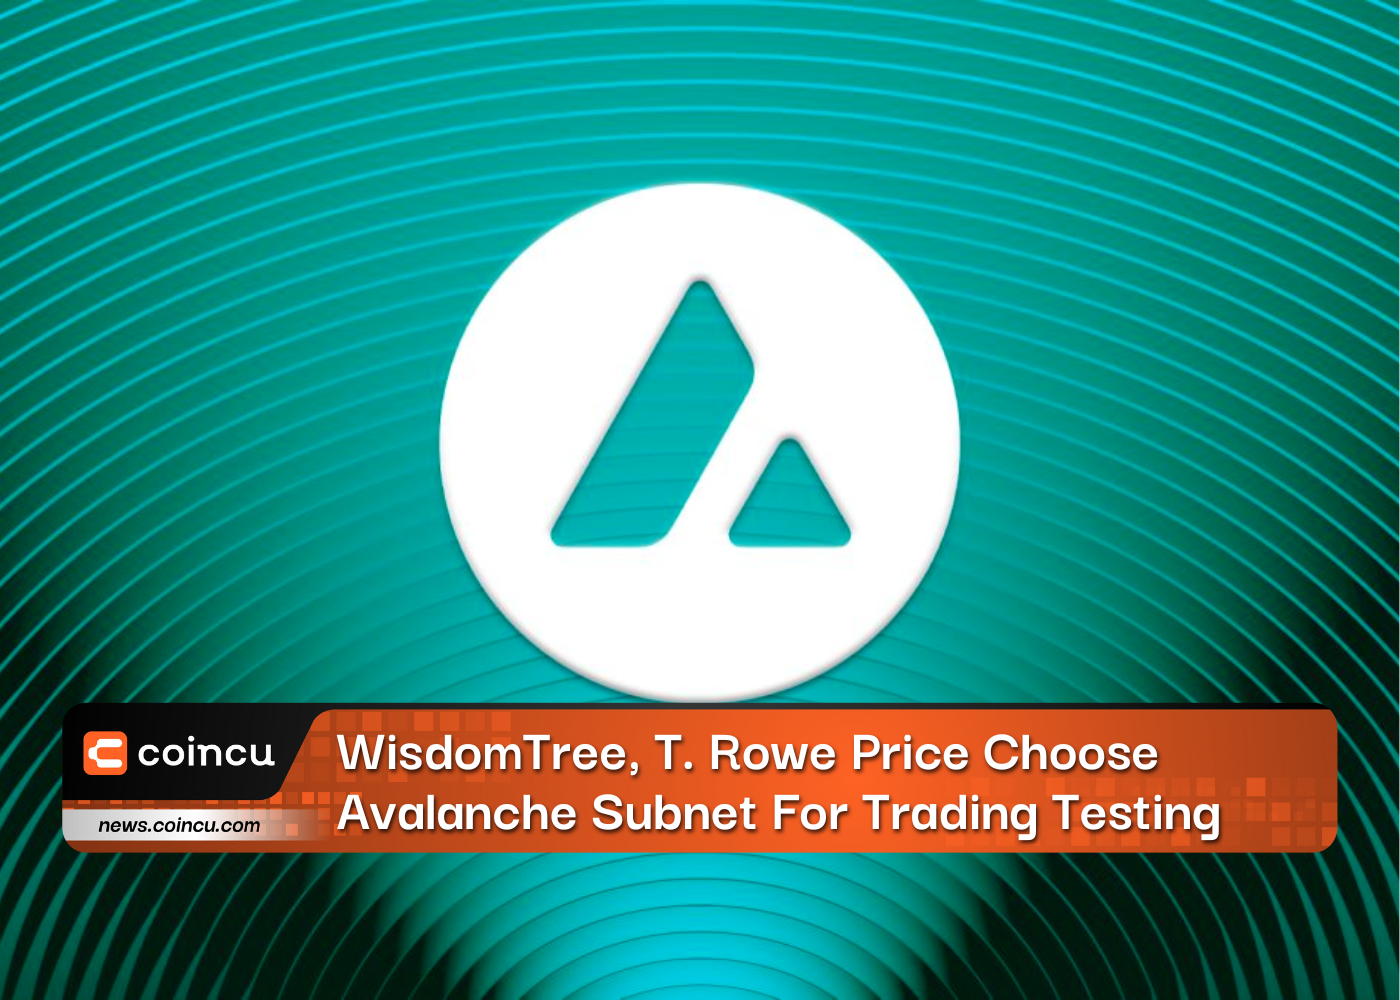 WisdomTree, T. Rowe Price Choose Avalanche Subnet For Trading Testing